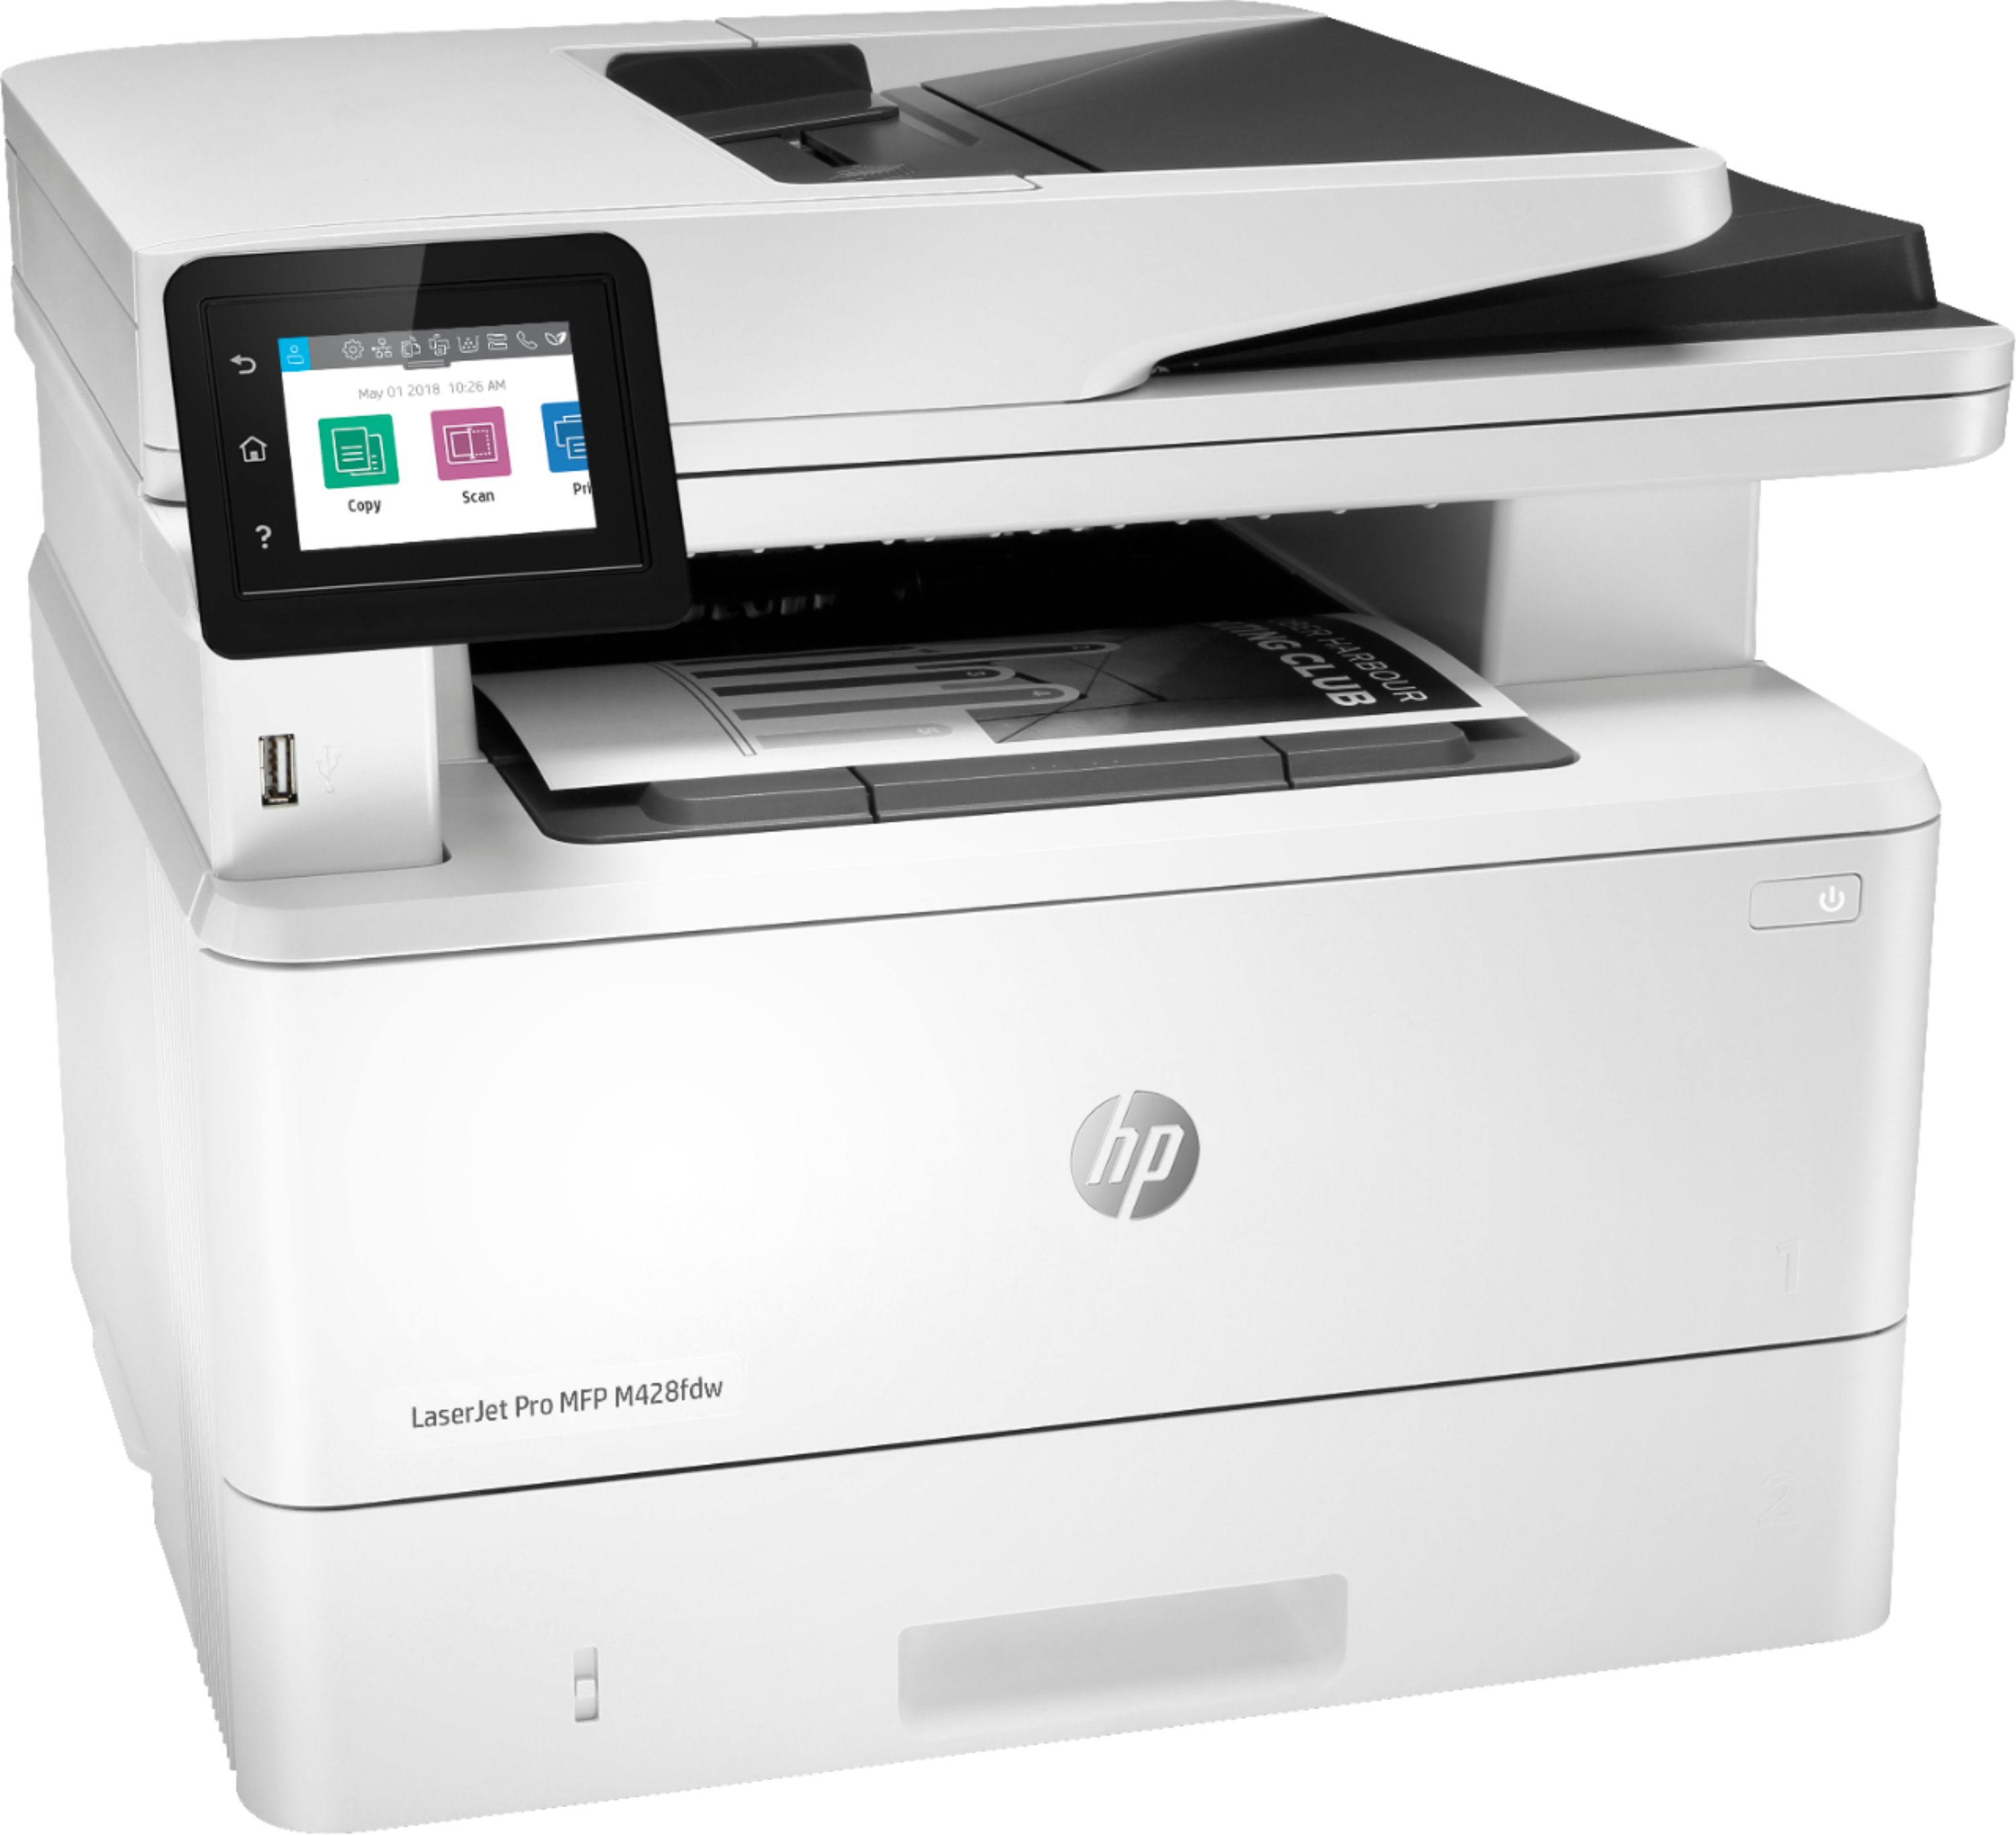 Angle View: HP - LaserJet Pro MFP M428fdw Black-and-White All-In-One Laser Printer - White